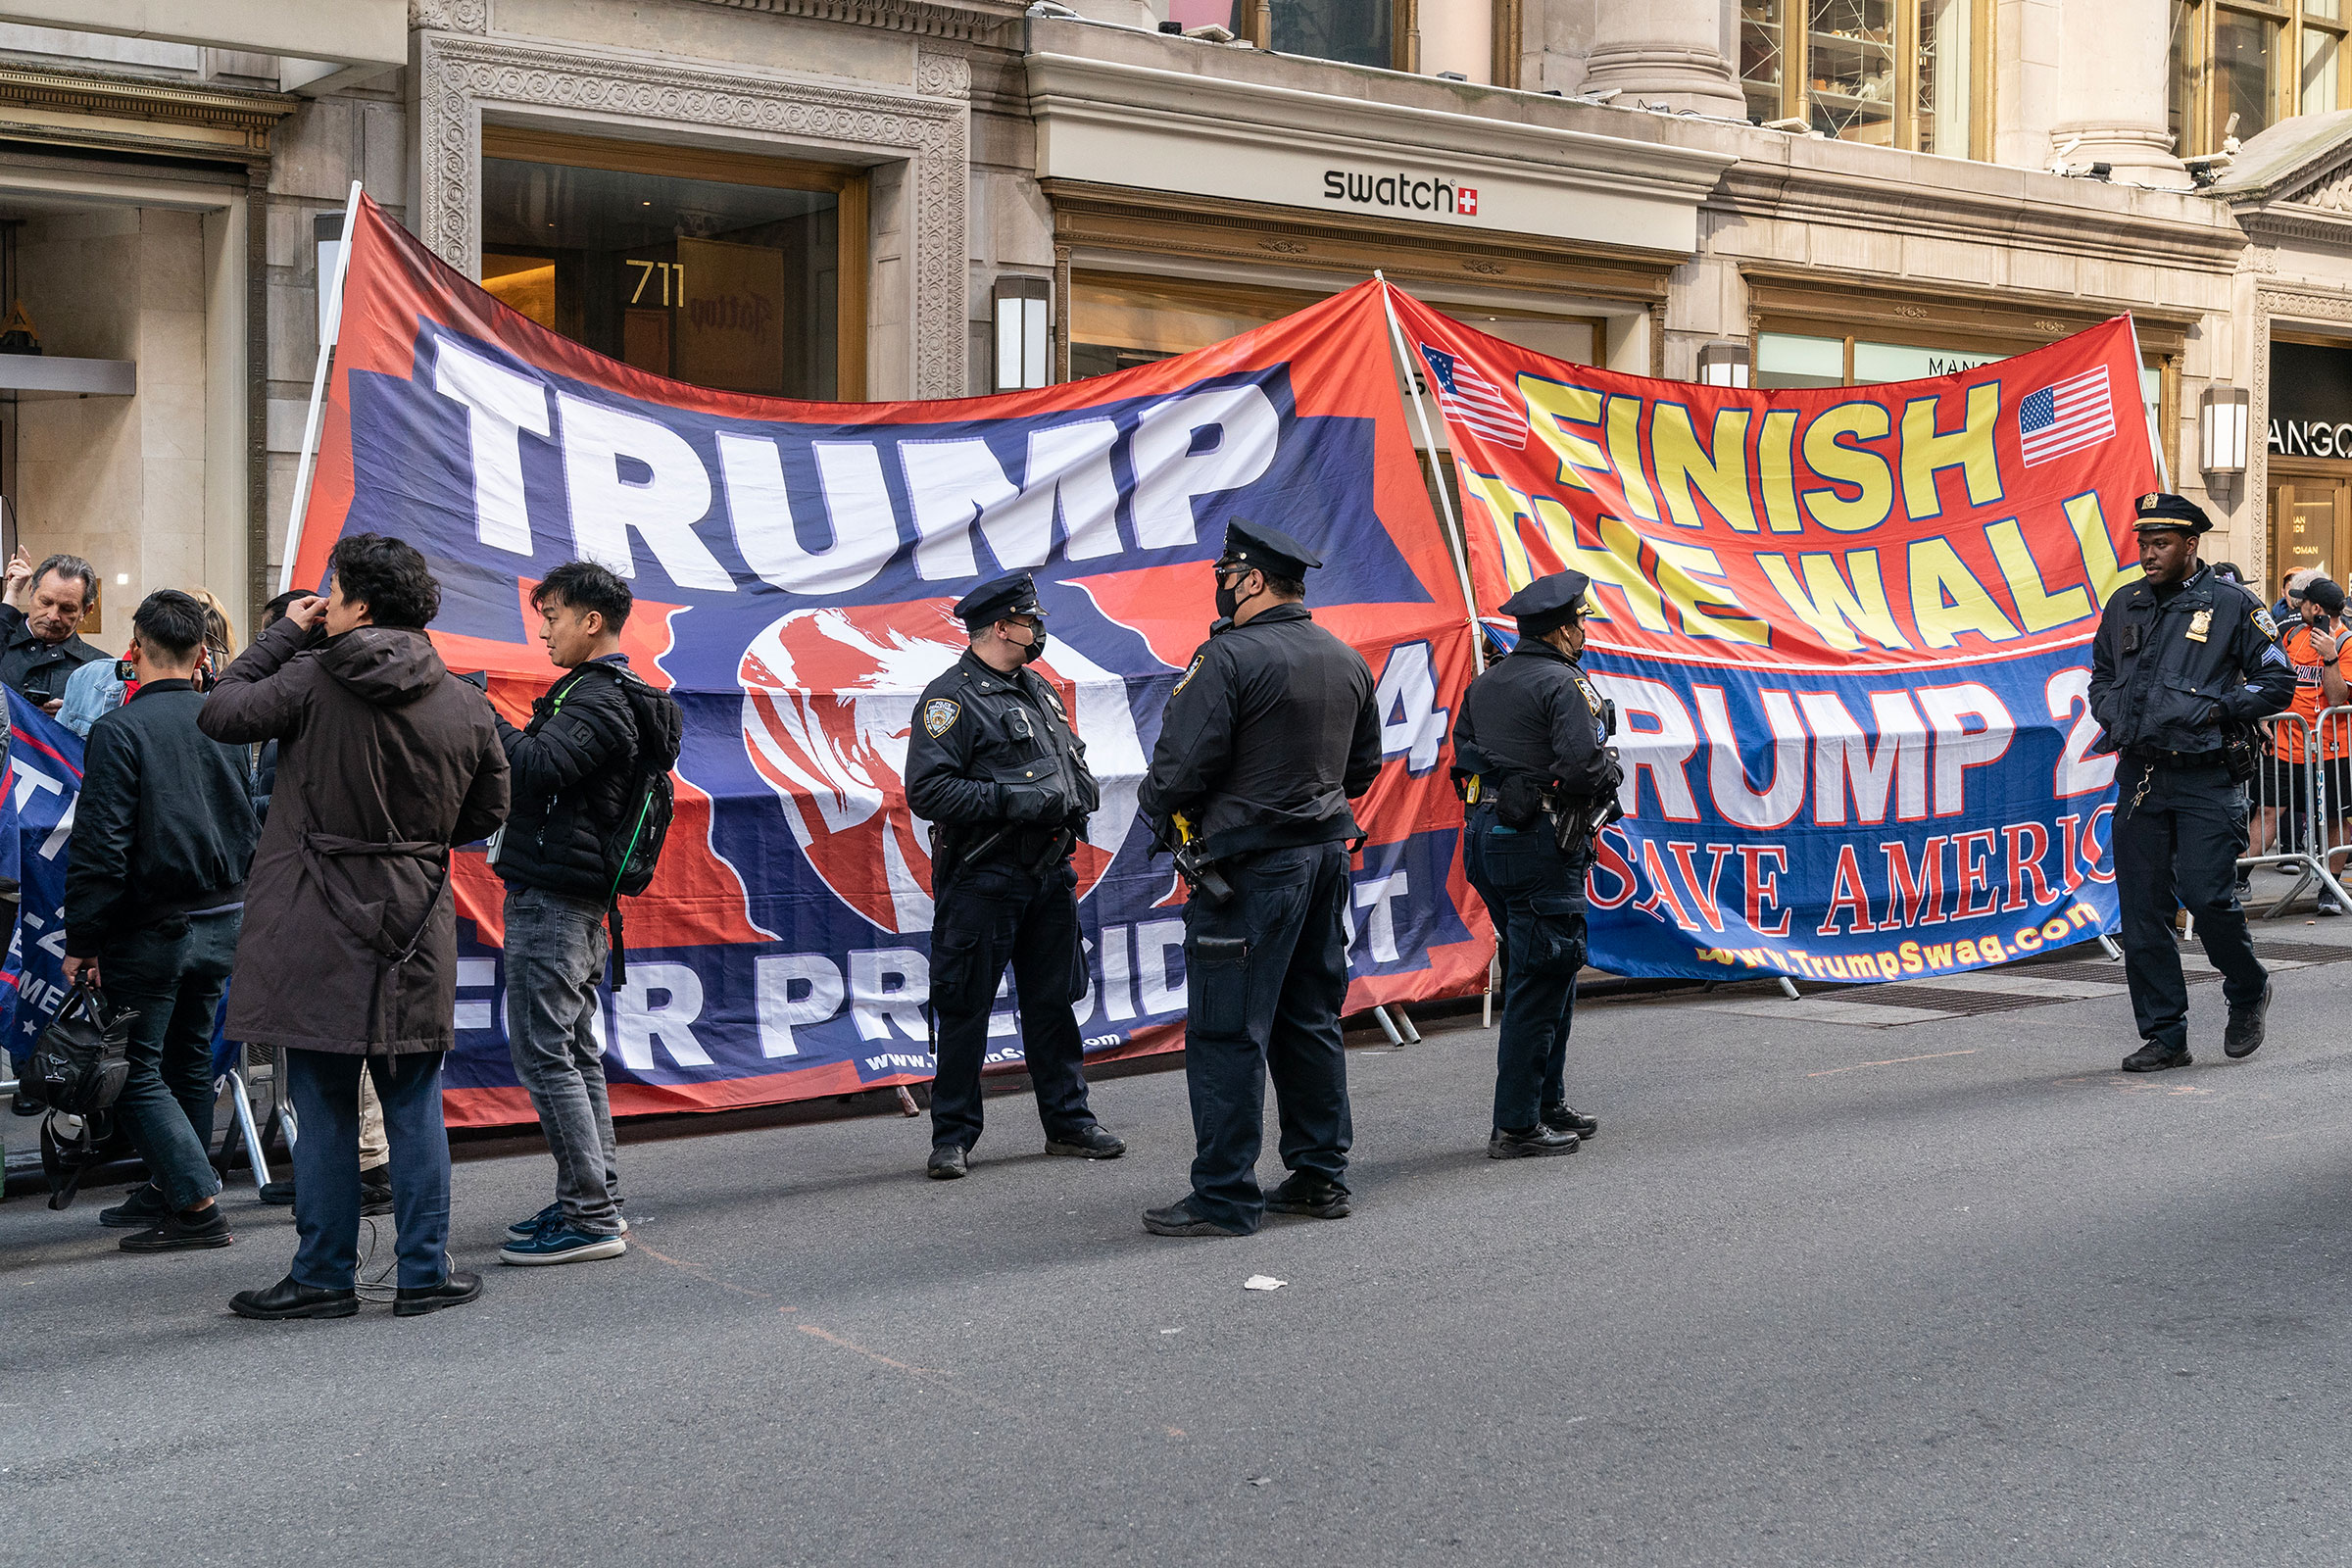 Supporters of Former President Donald Trump rally at Trump Tower in New York.